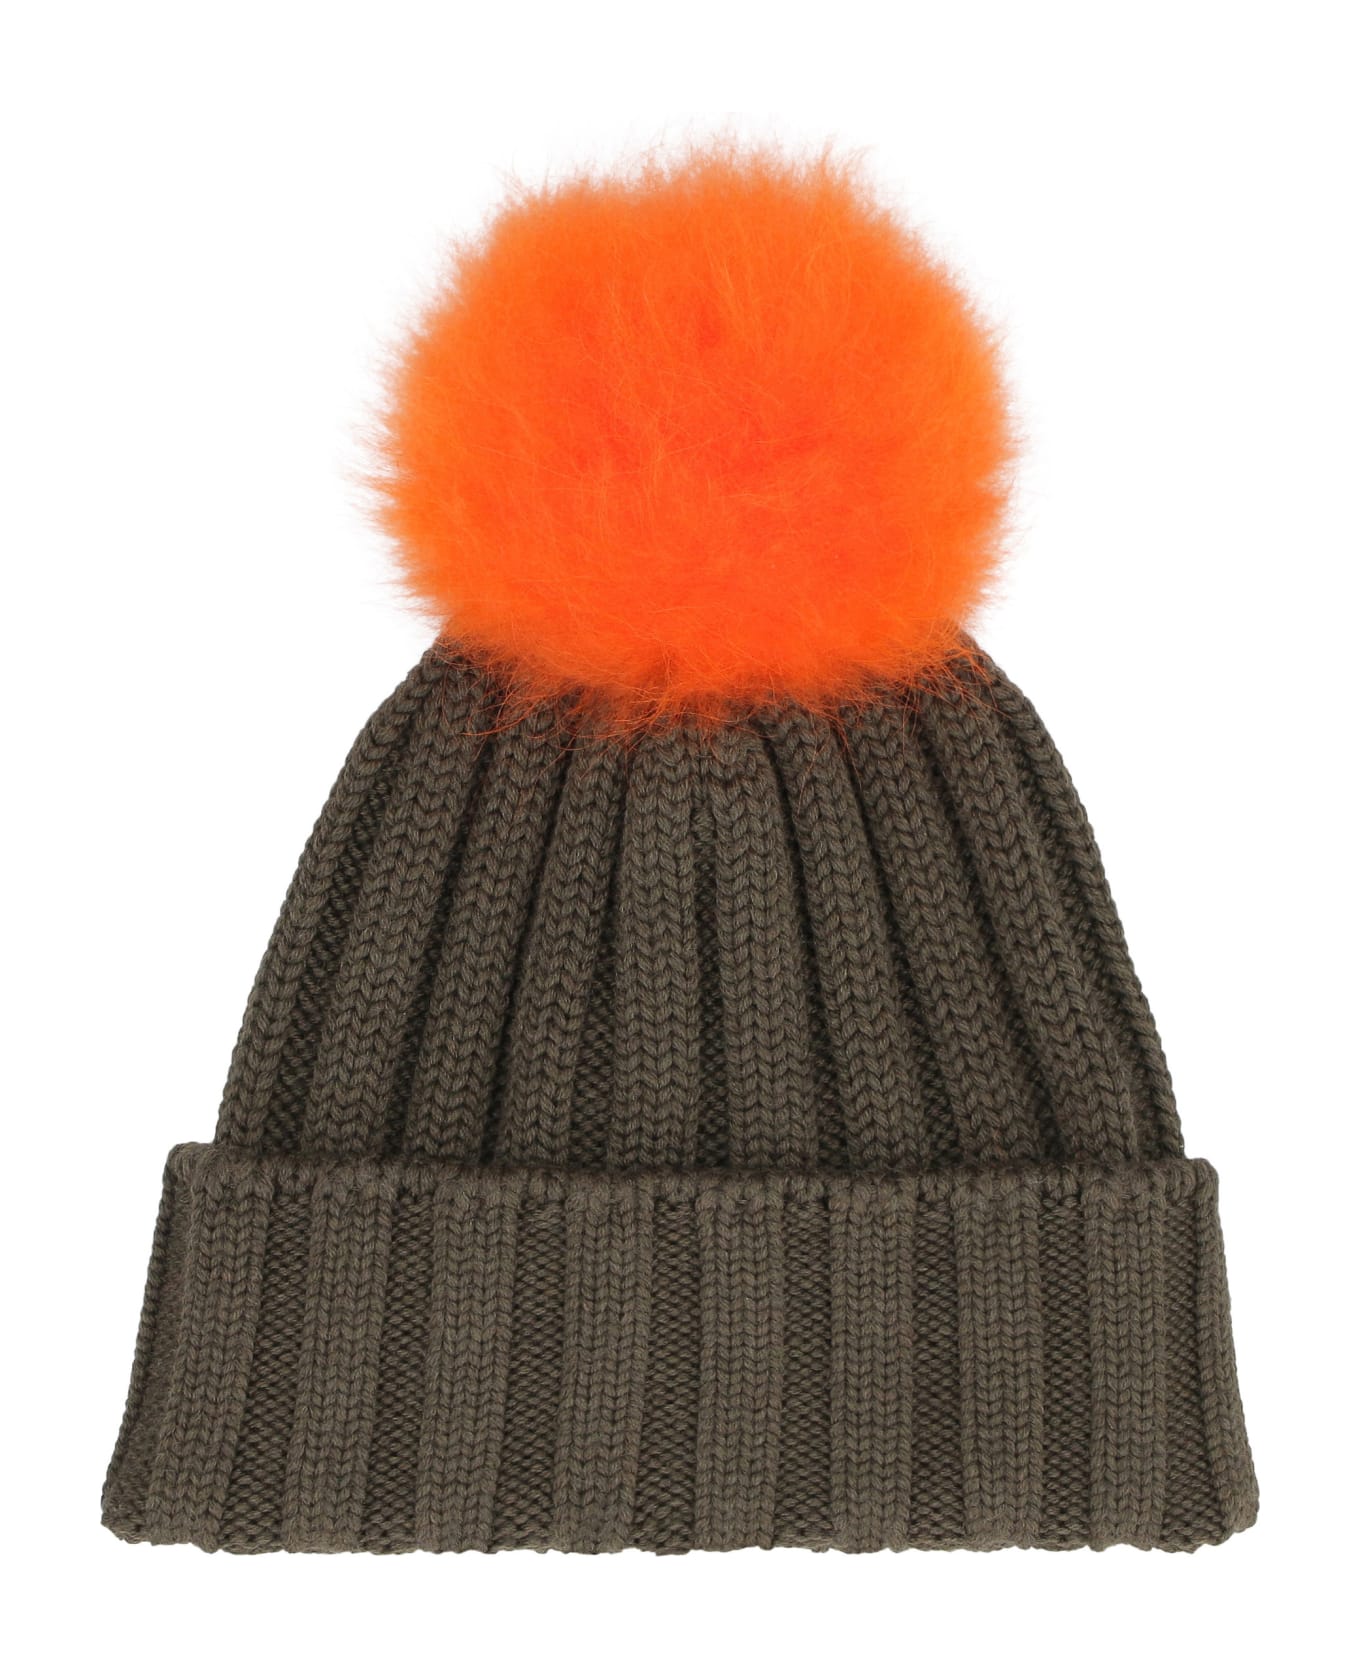 Woolrich Knitted Wool Hat With Pom-pom - green